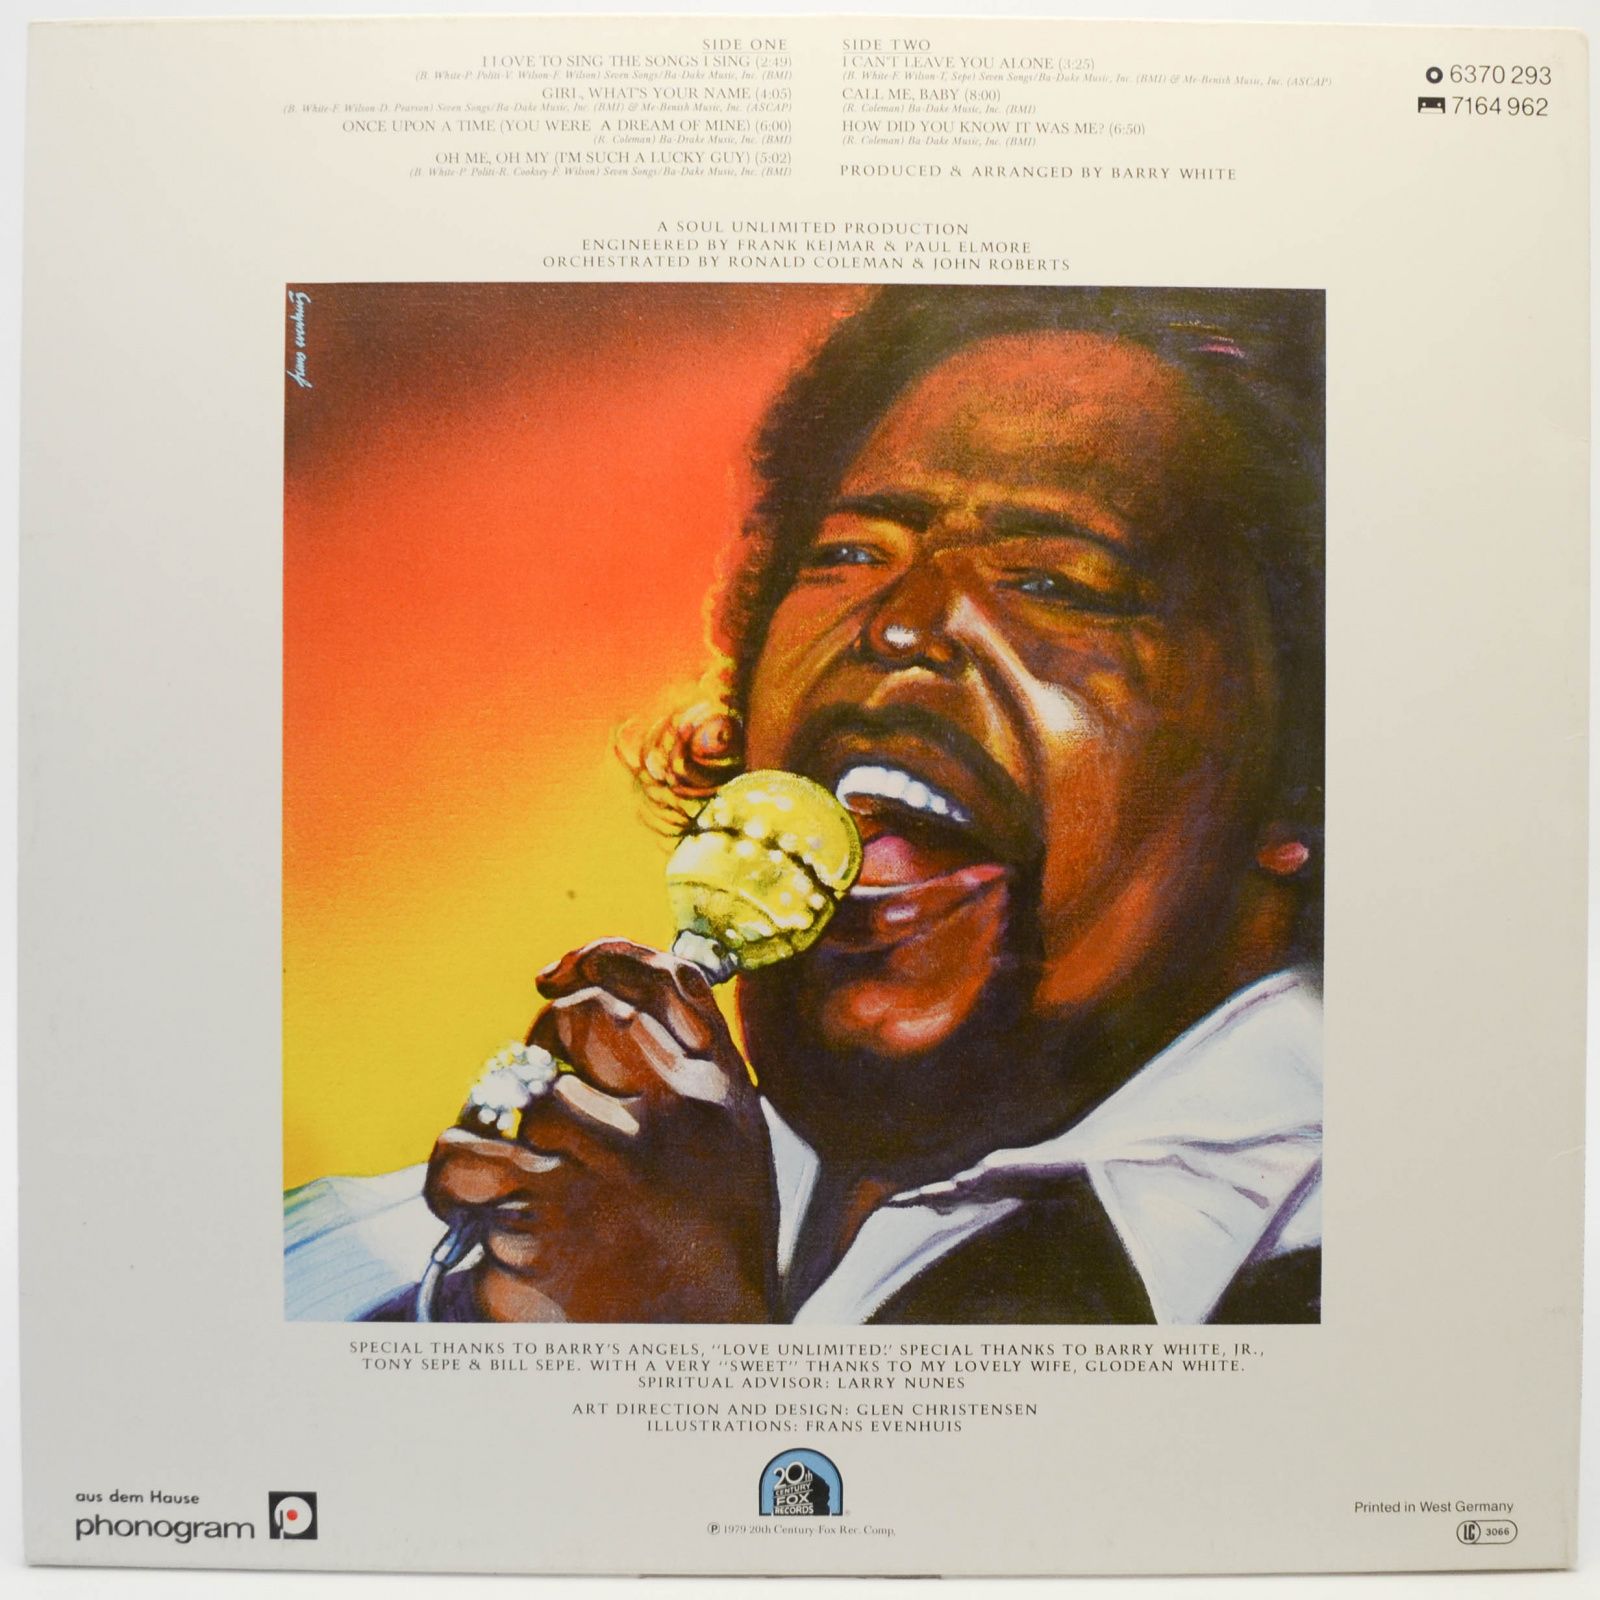 Barry White — I Love To Sing The Songs I Sing, 1979